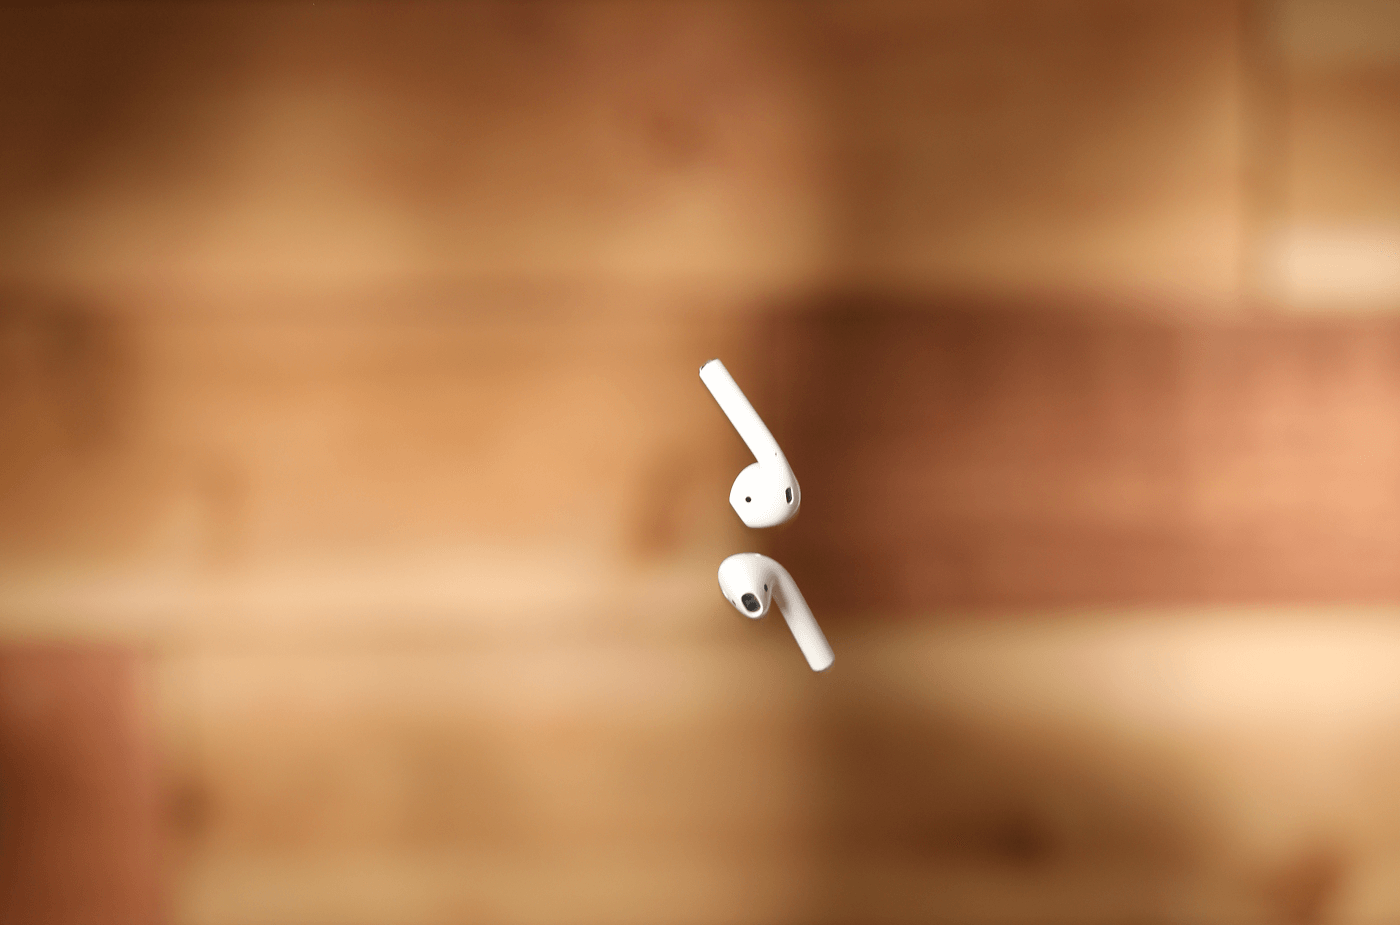 AirPods in air.